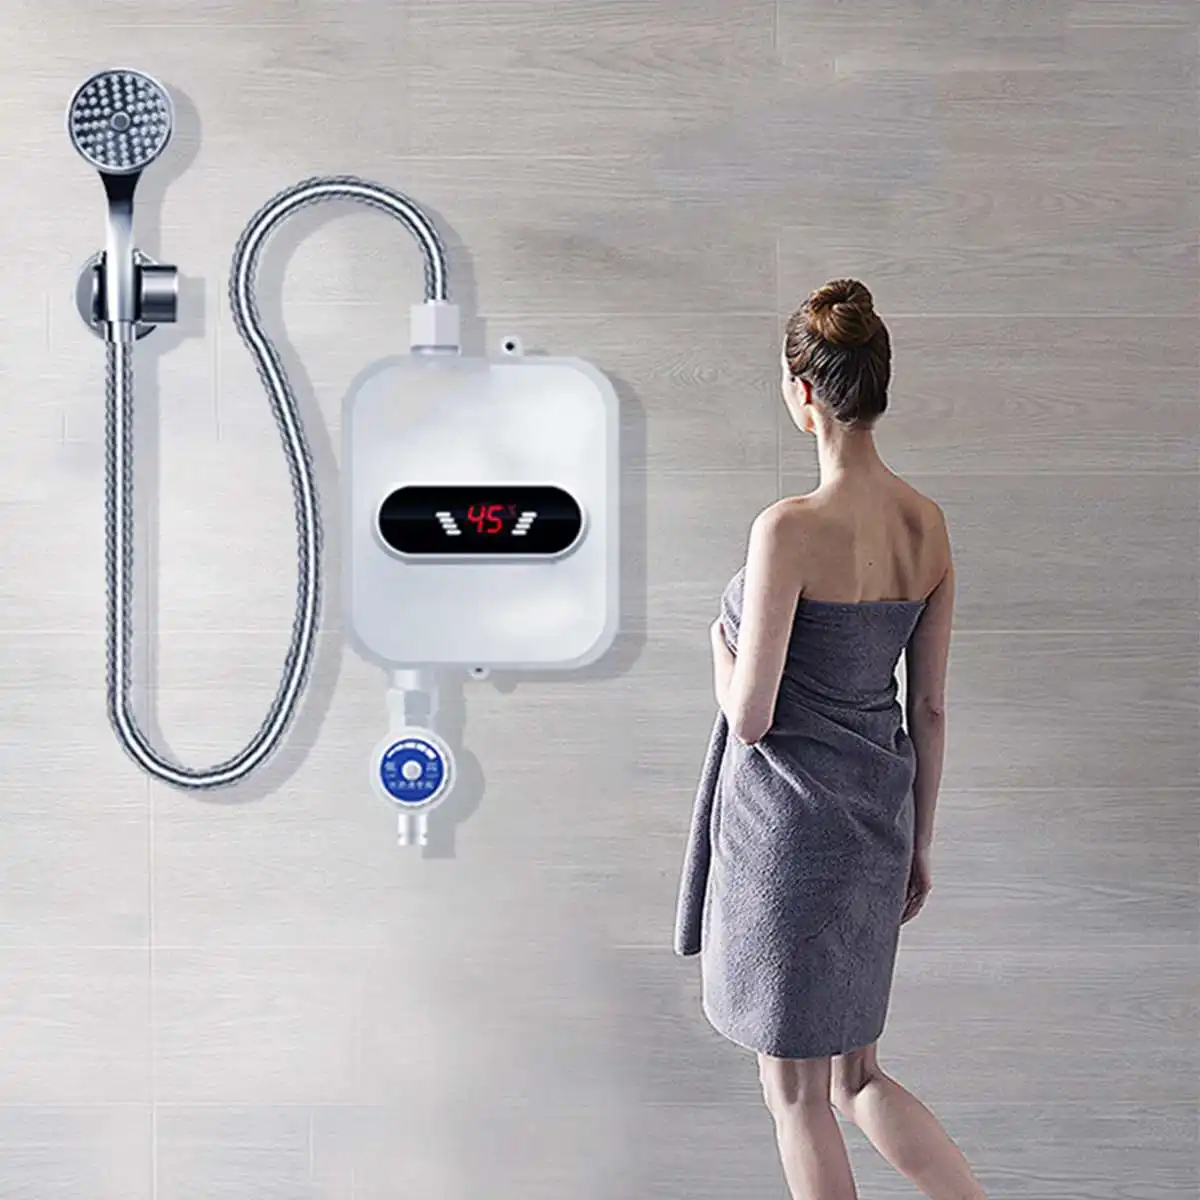 3500W Instant Water Heater Shower 220V Bathroom Faucet EU Plug Hot Water Heater Digital Display For Country House Cottage Hote enlarge